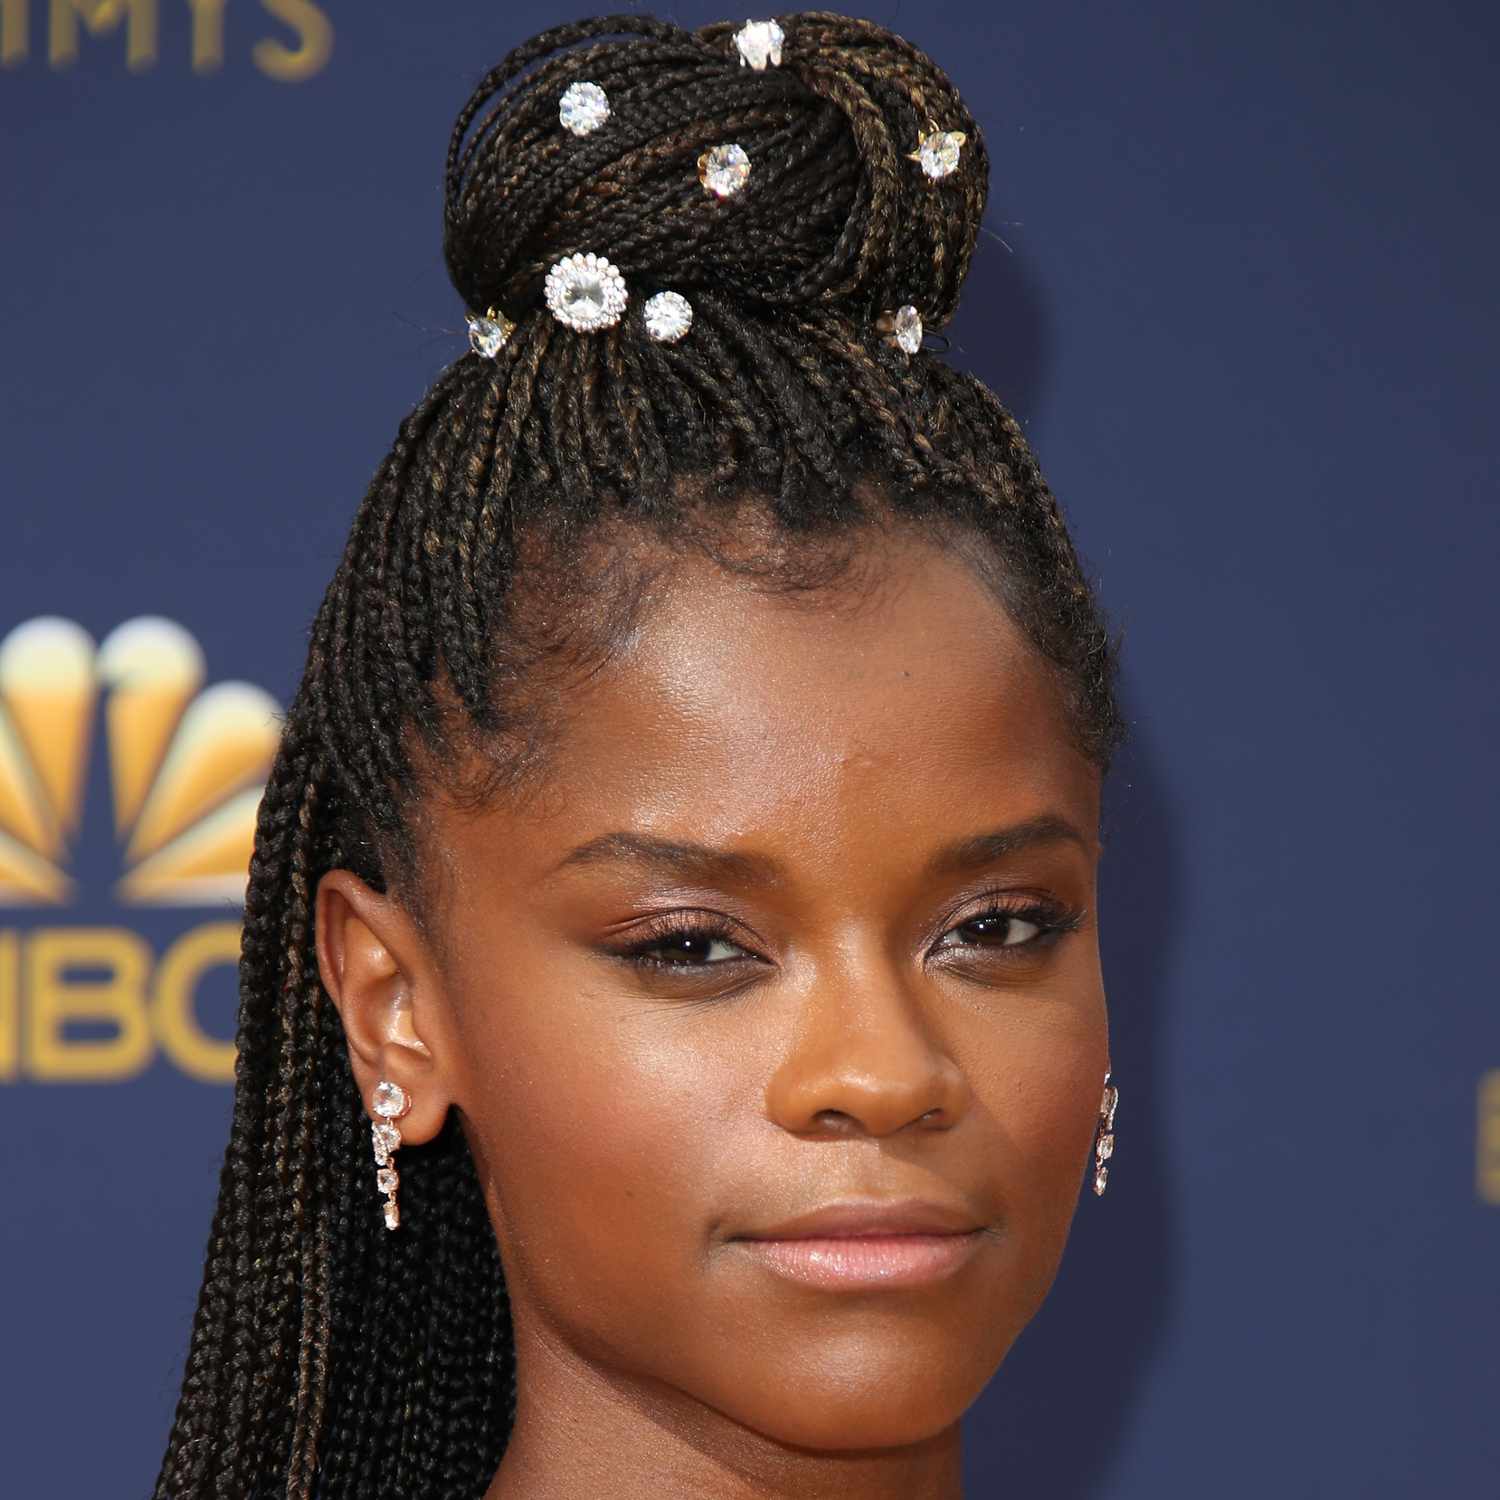 Letitia Wright looking at camera, zoomed in on hair in braids and pulled up into a large bun on top of head with crystal embellishments